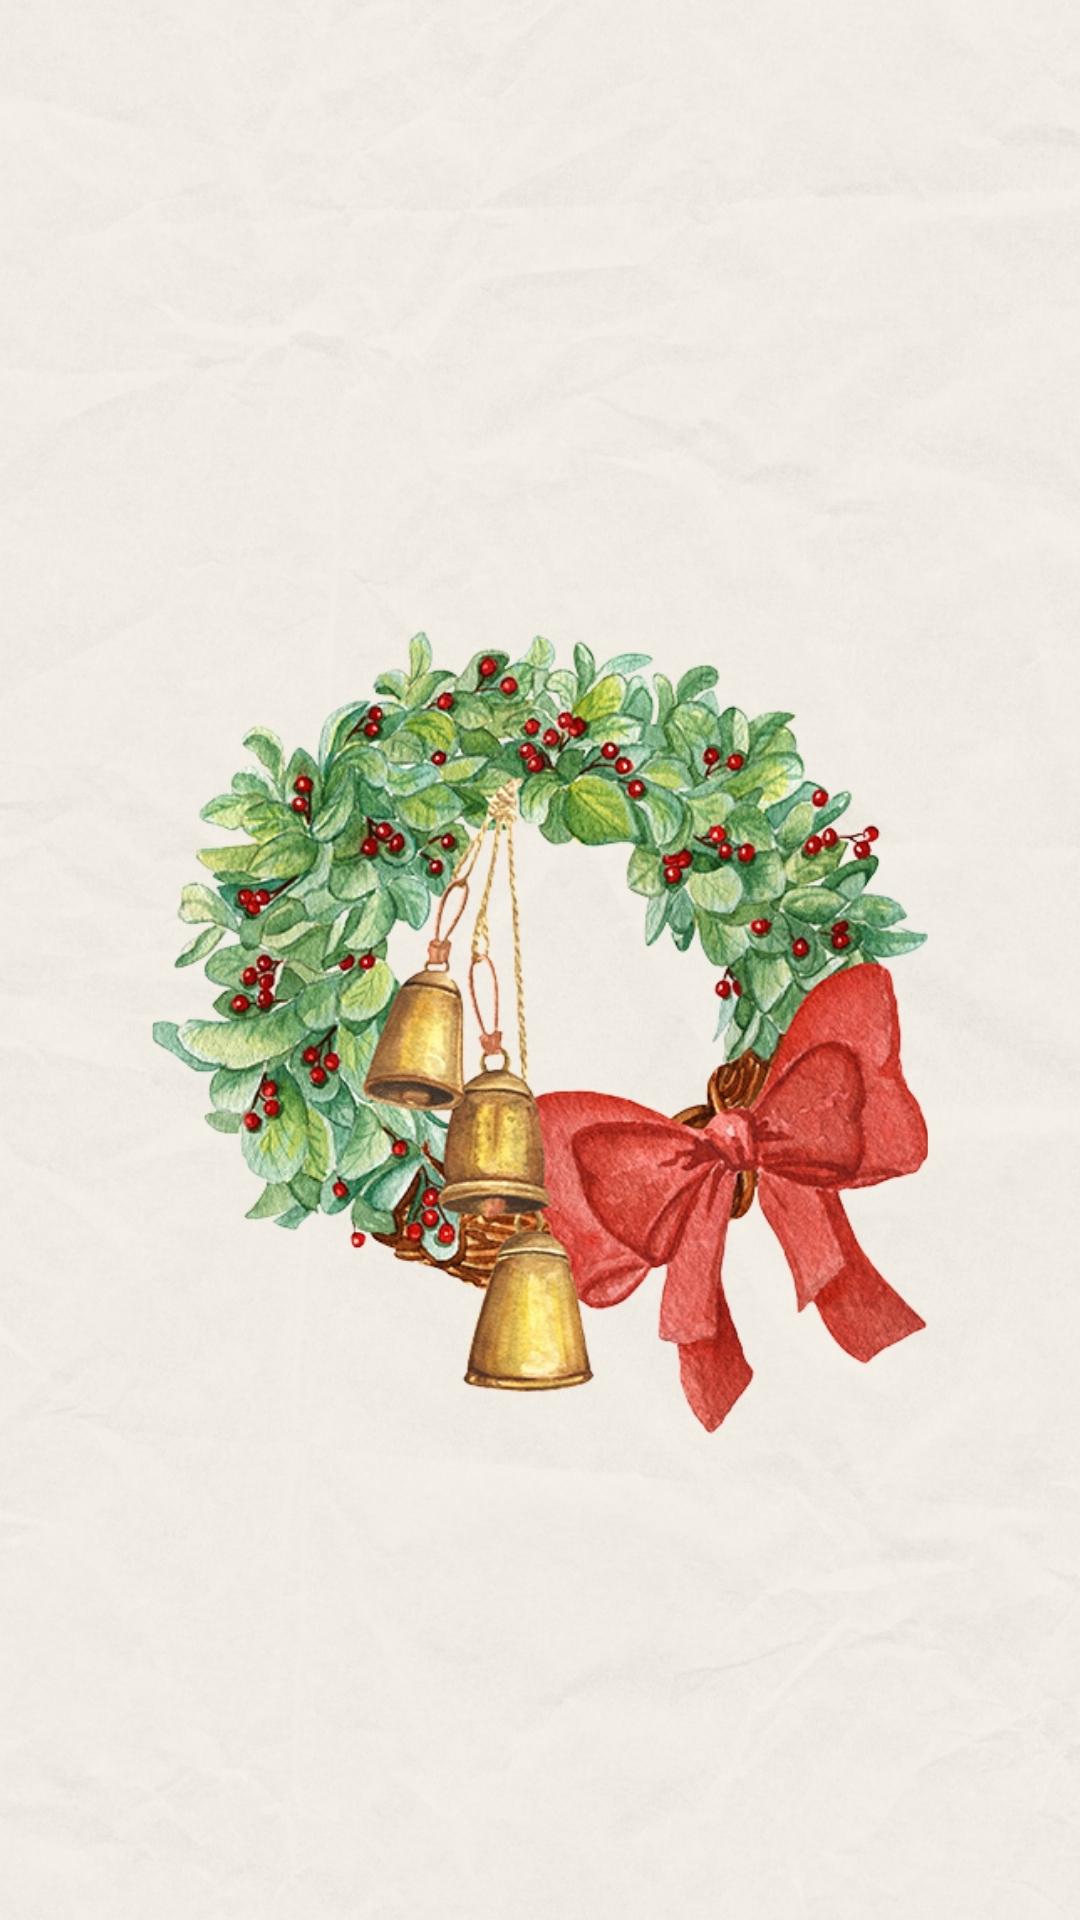 A Christmas phone wallpaper background with a simple watercolor wreath on an off-white background.